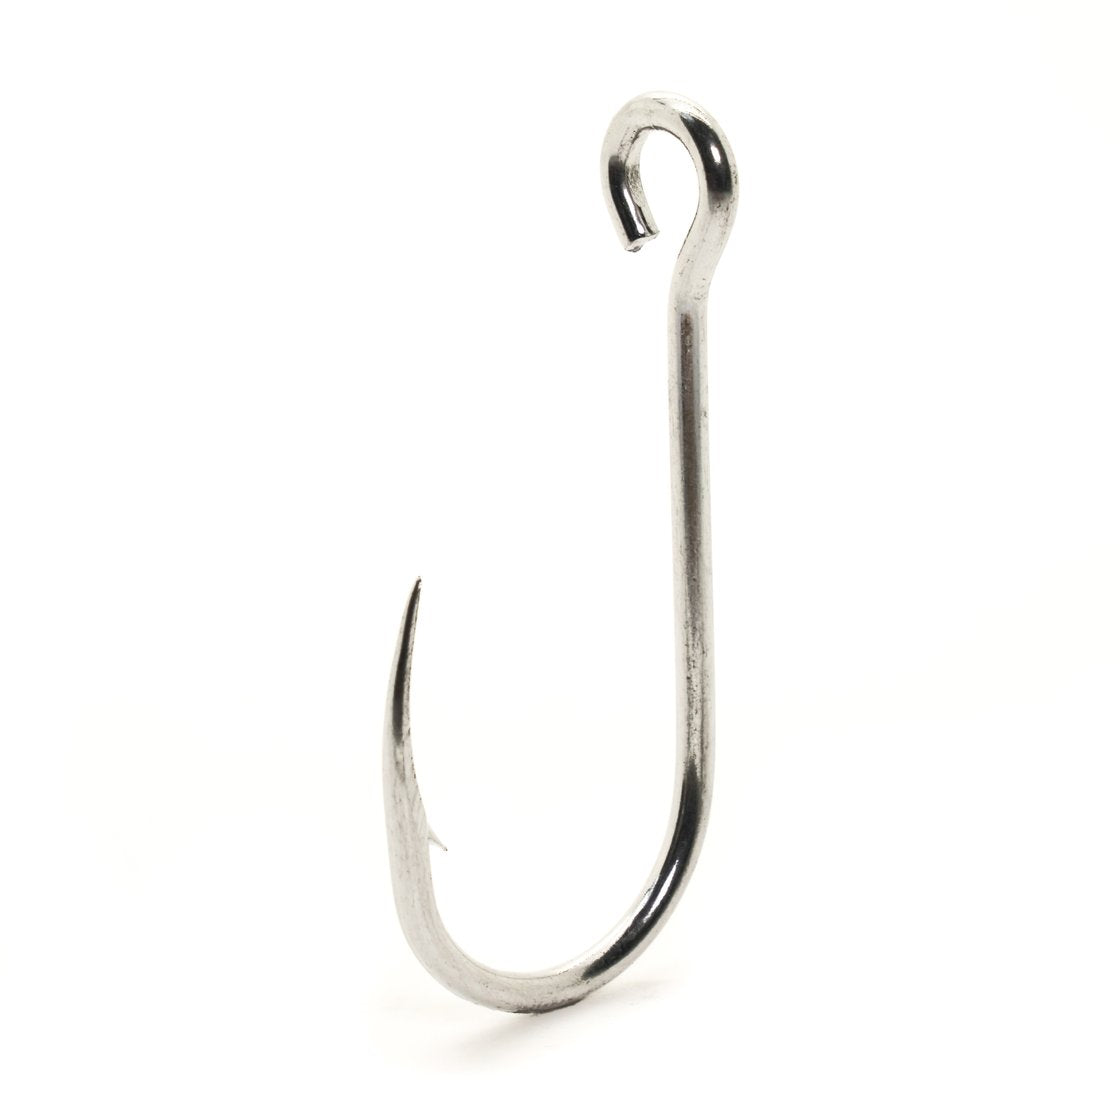 MUSTAD 95170-SS Salmon Siwash - 3x Strong - Stainless Steel Hooks (25